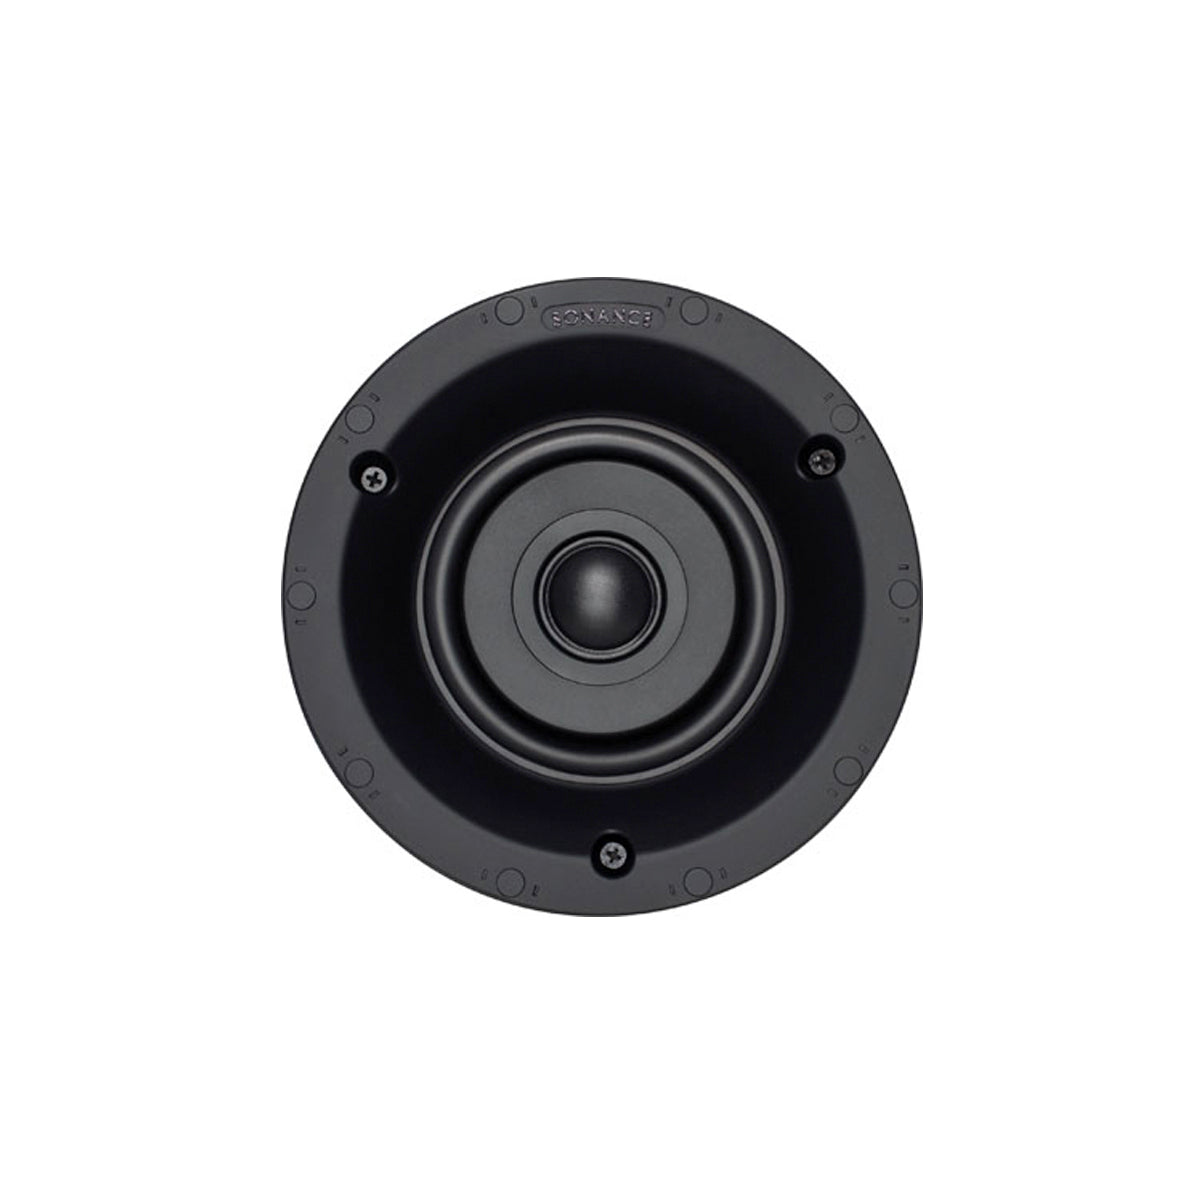 Sonance VP42R Inceiling Speakers - The Audio Experts